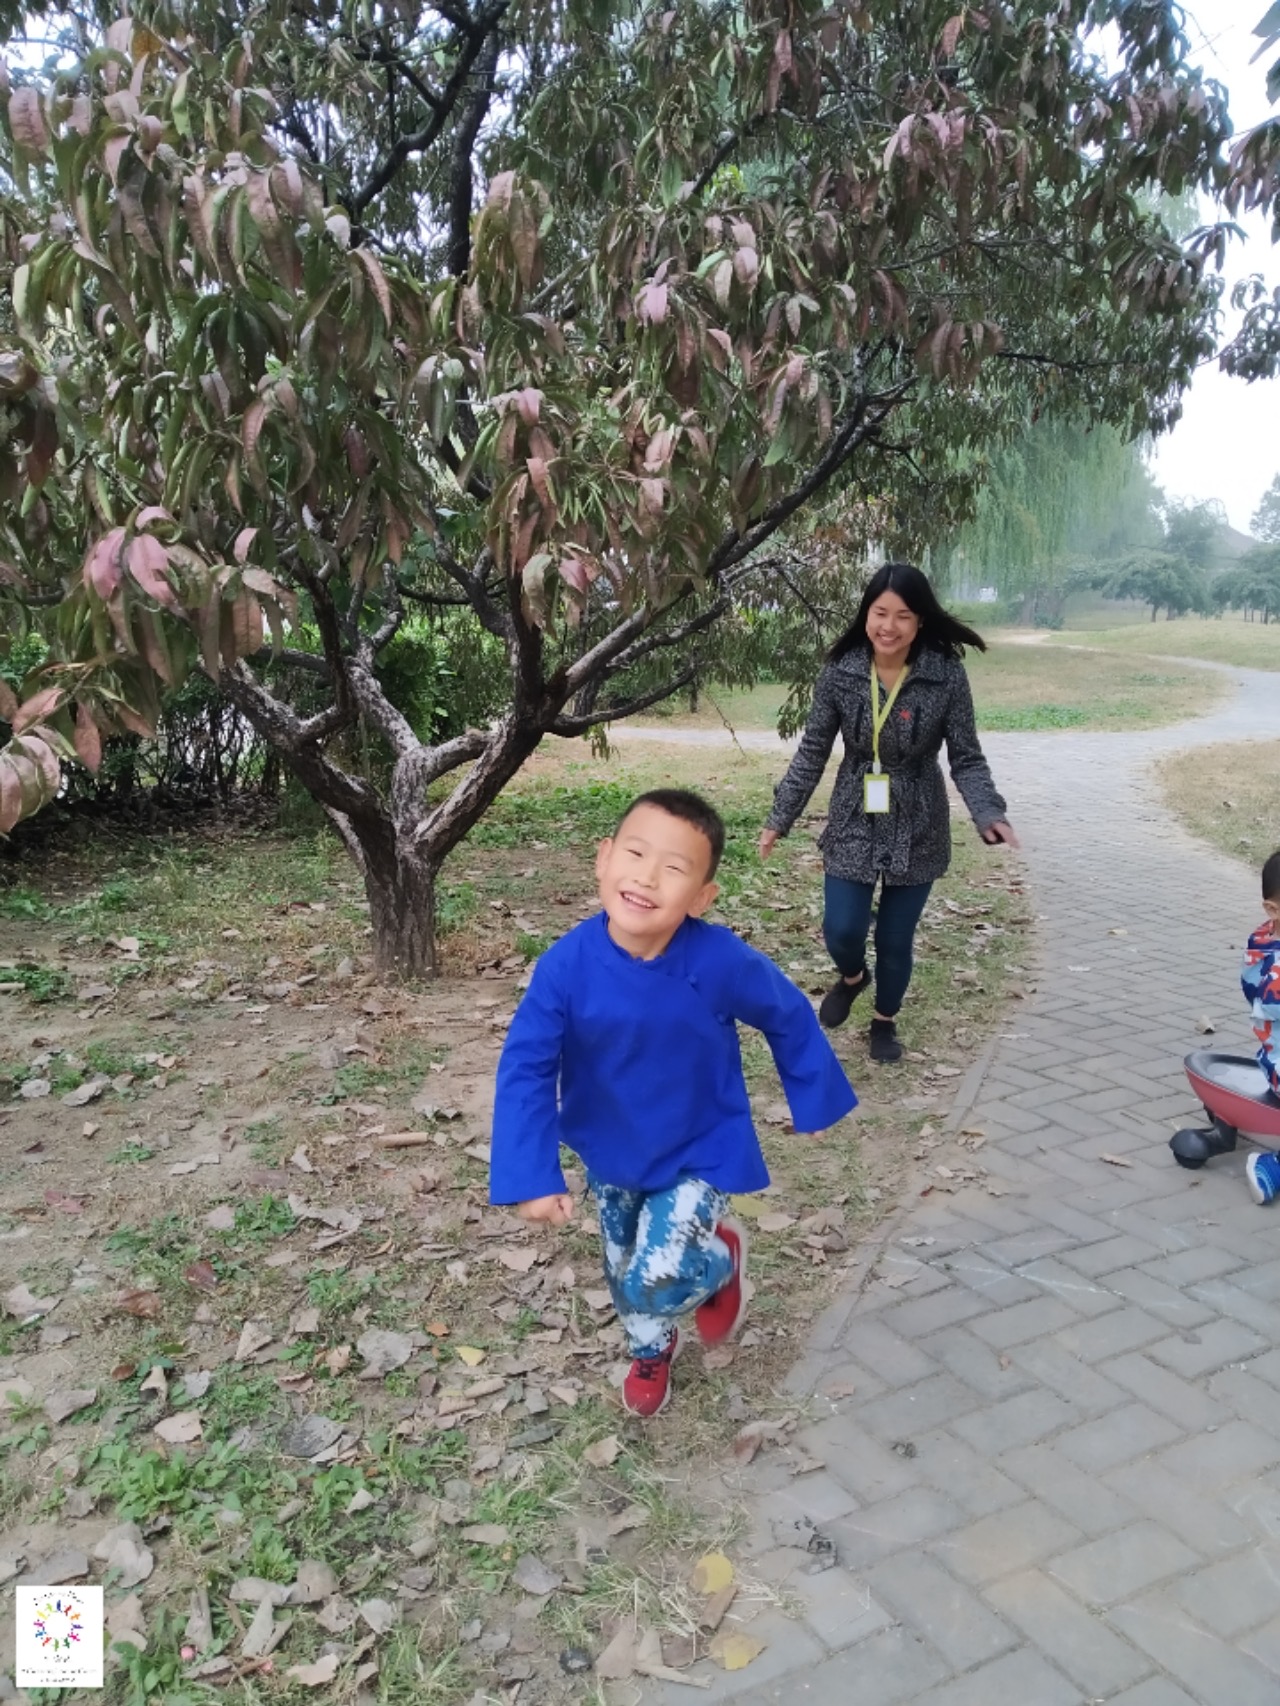 Playing with a child at the learning center visit, running under a tree.